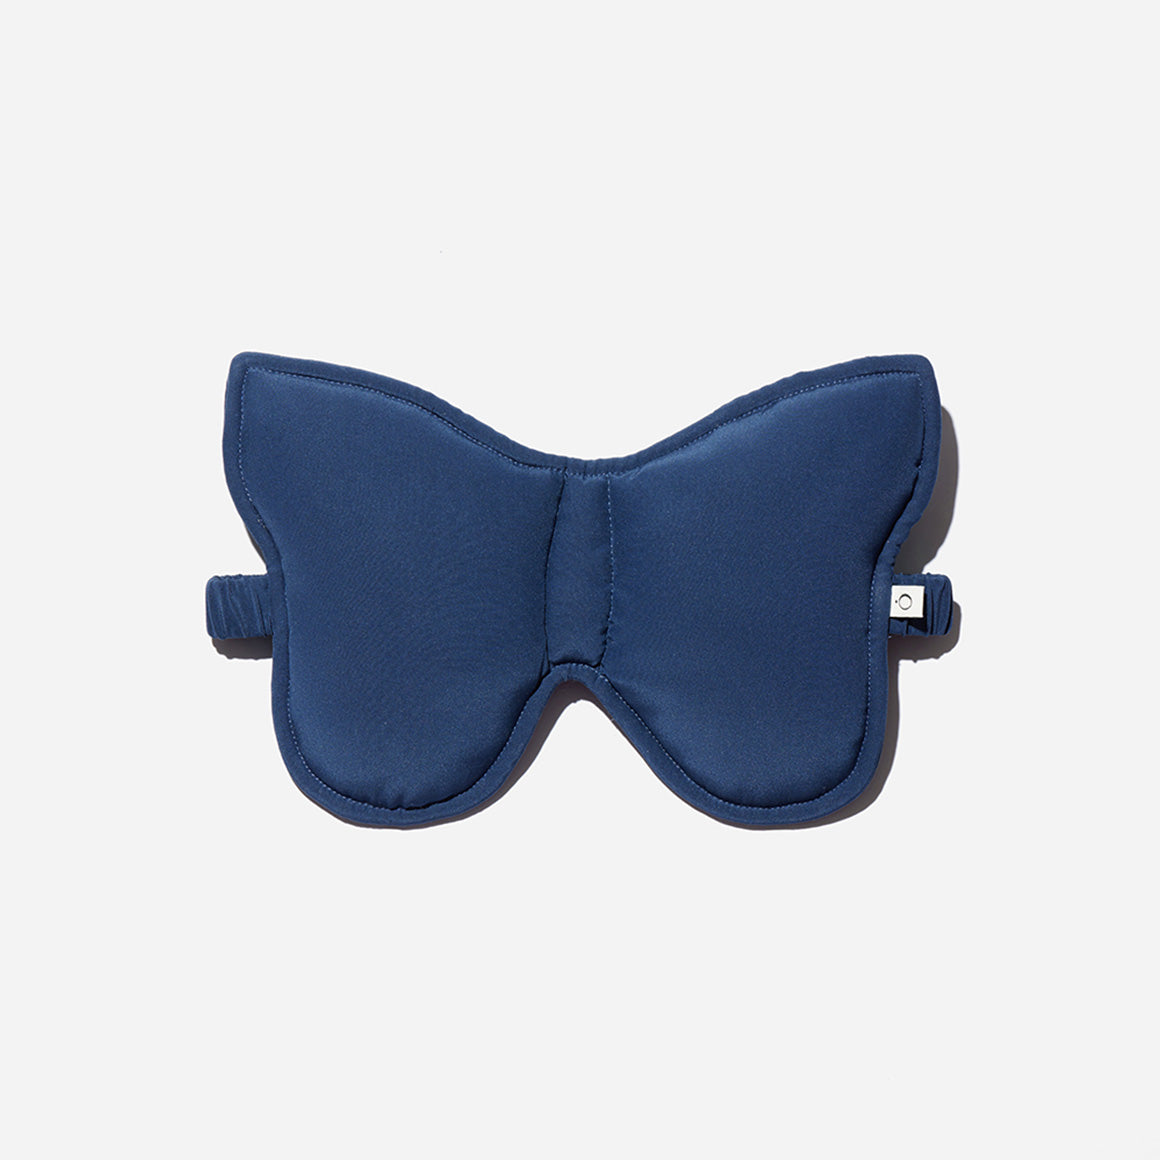 Crafted from luxe silk charmeuse, our butterfly sleep mask brings a sense of joy and whimsy to bedtime. It is oversized and extra plush to block out as much ambient light as possible. Soft on the skin and gentle on hair, your best beauty sleep is within reach.